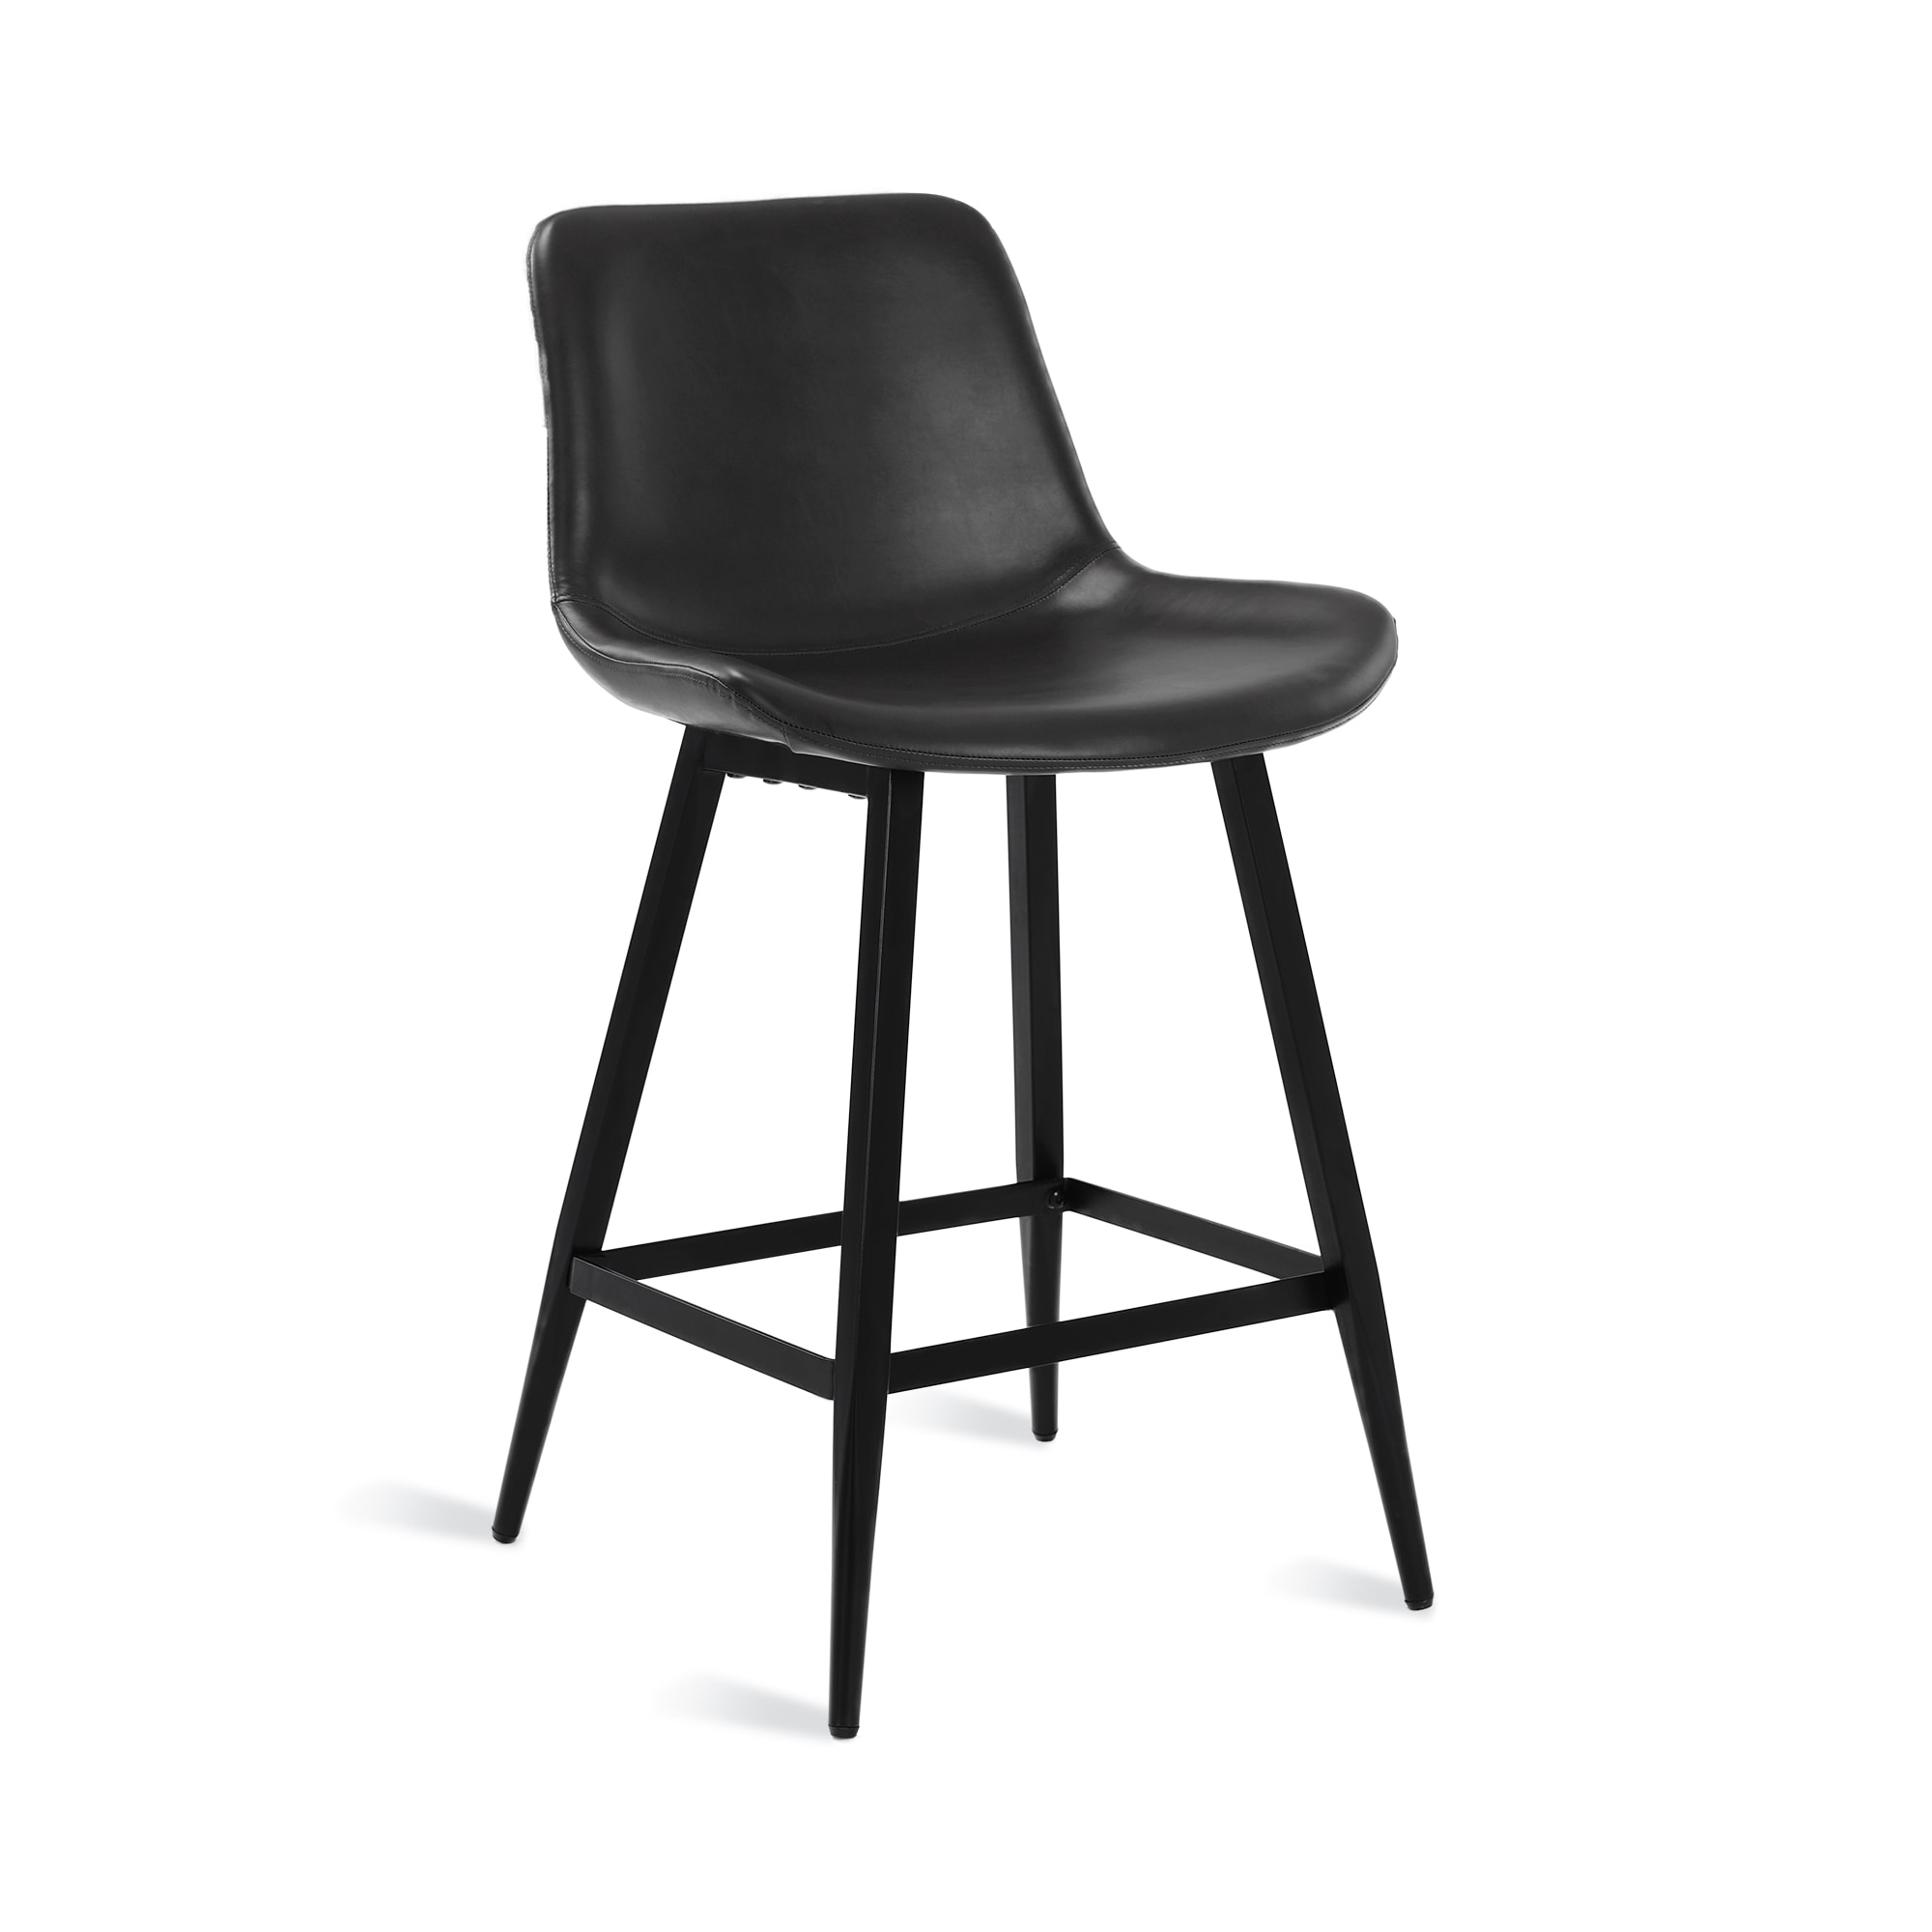 LUE BONA 33.5 in. Gray Faux Leather Bar Stools Metal Frame Counter